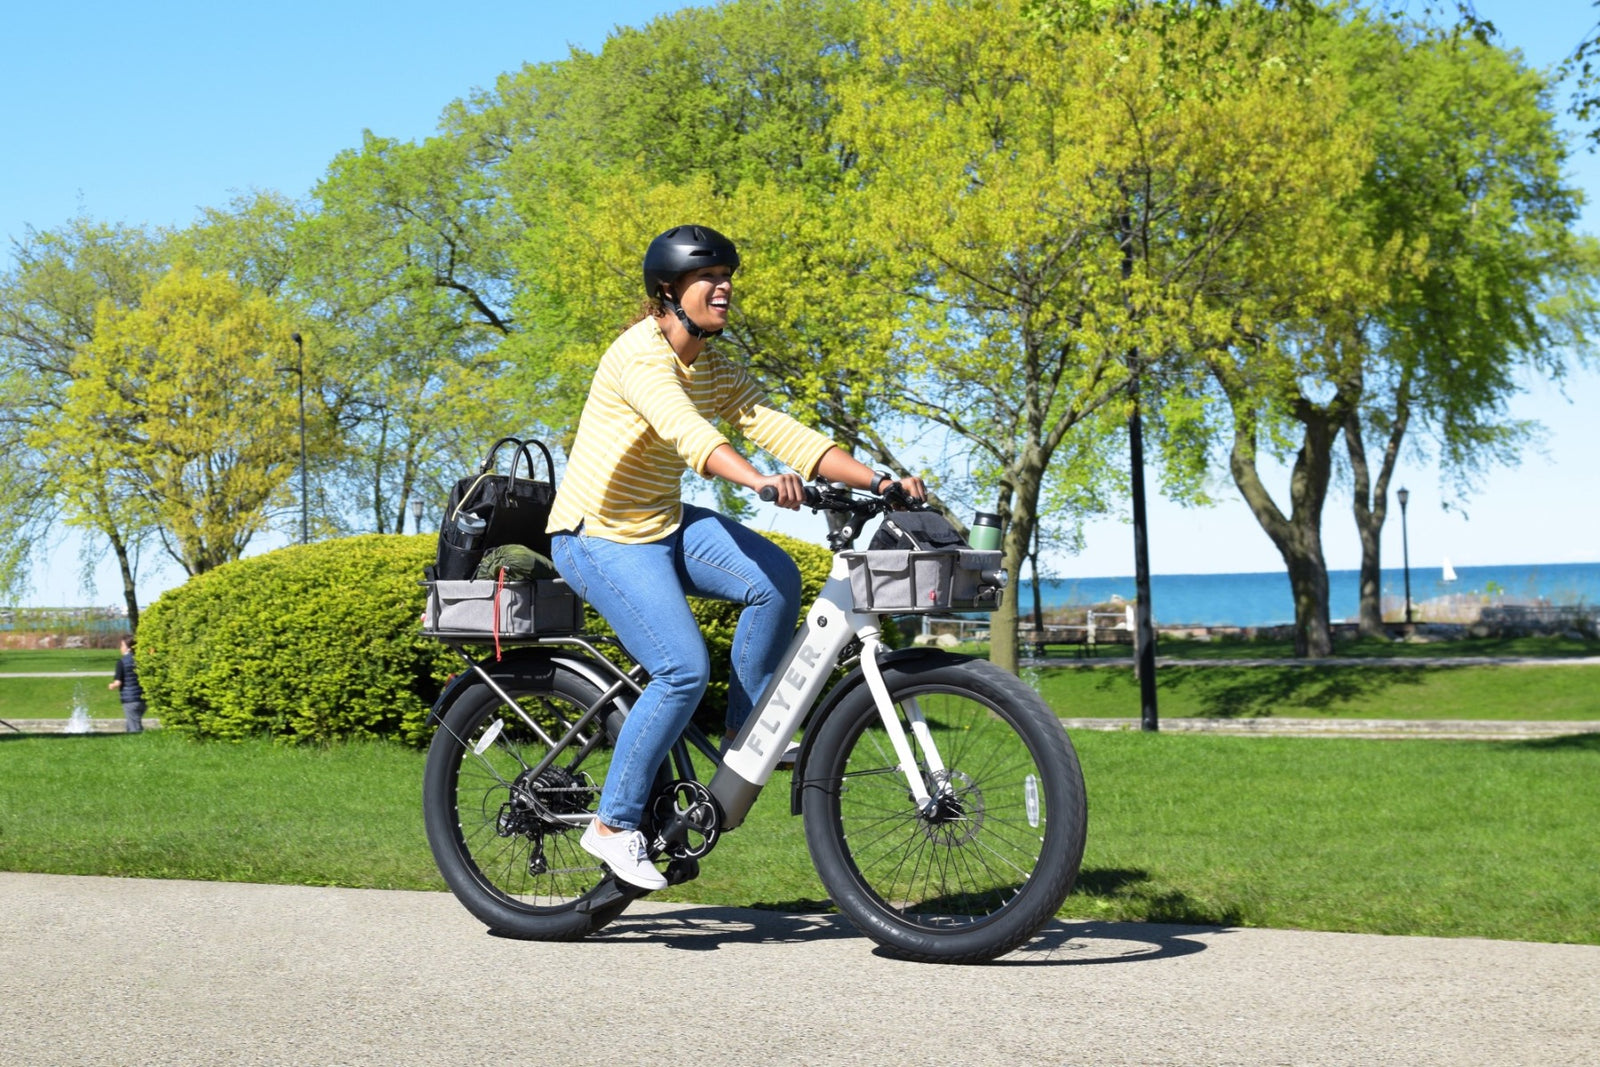 5 Reasons Why eBikes & eScooters Are Great for Commuting